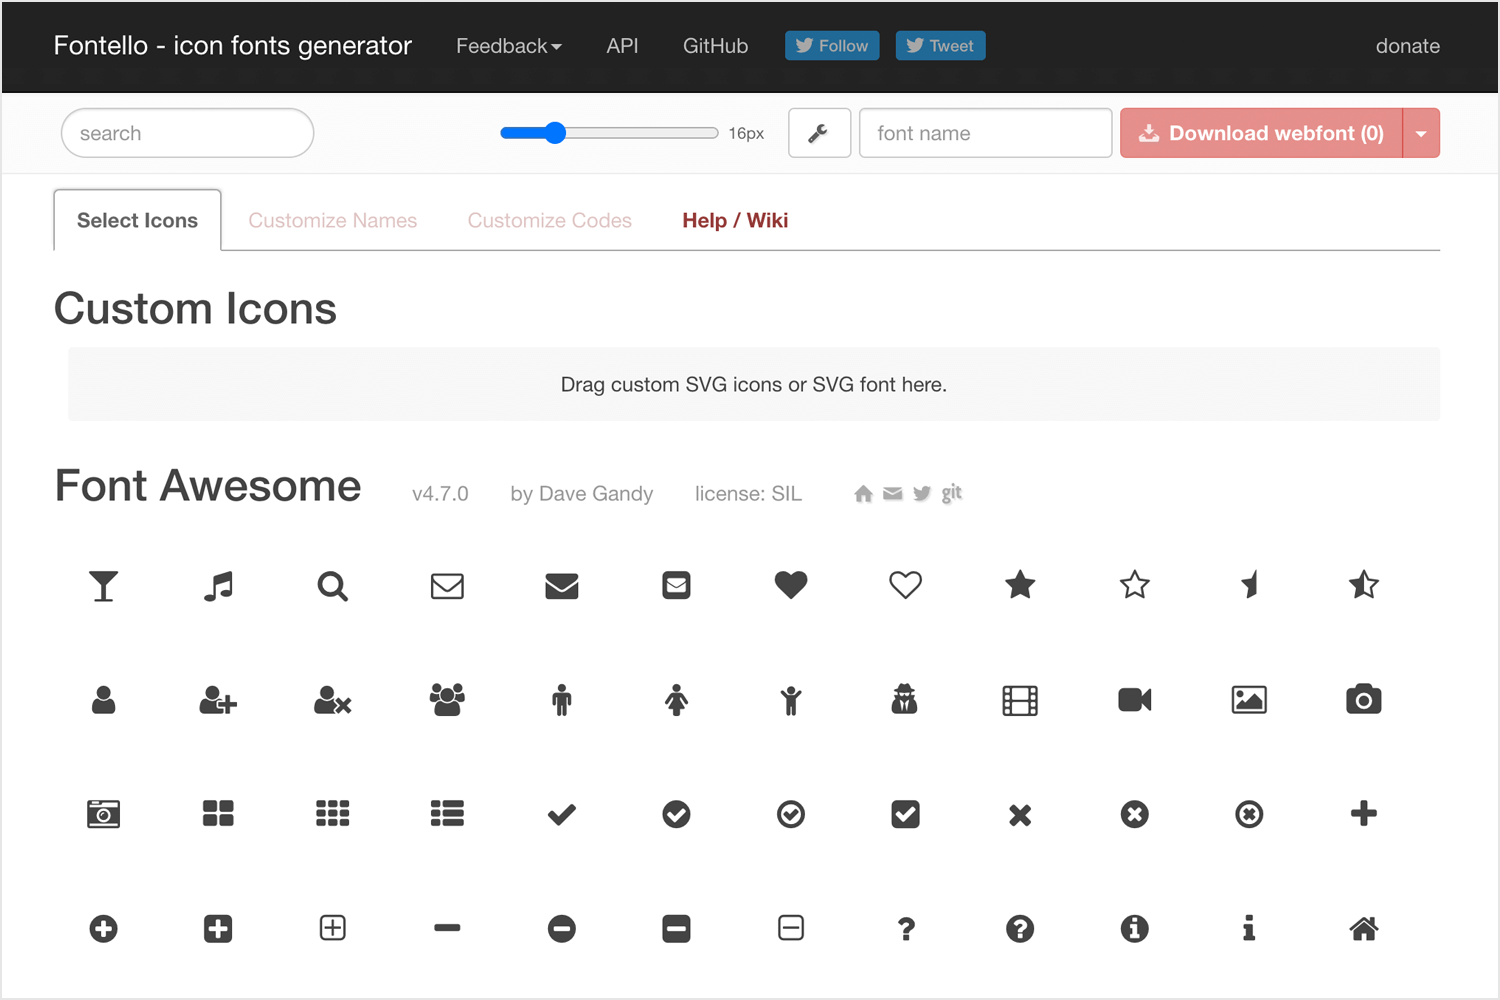 fontello as place for free icons and fonts